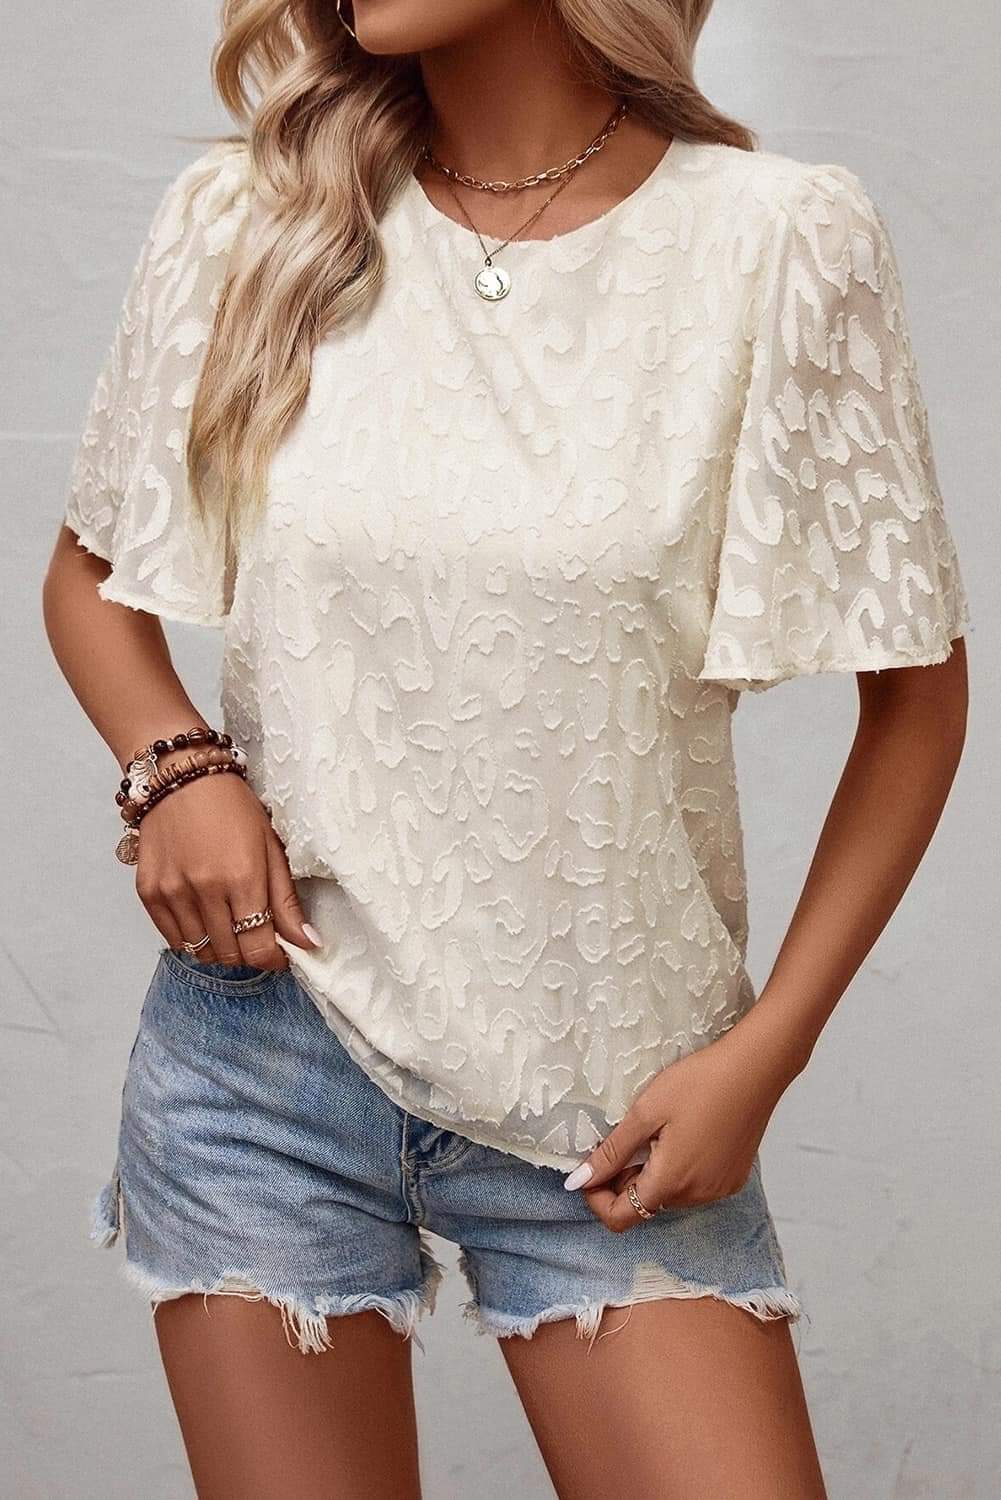 Butterfly sleeve blouse